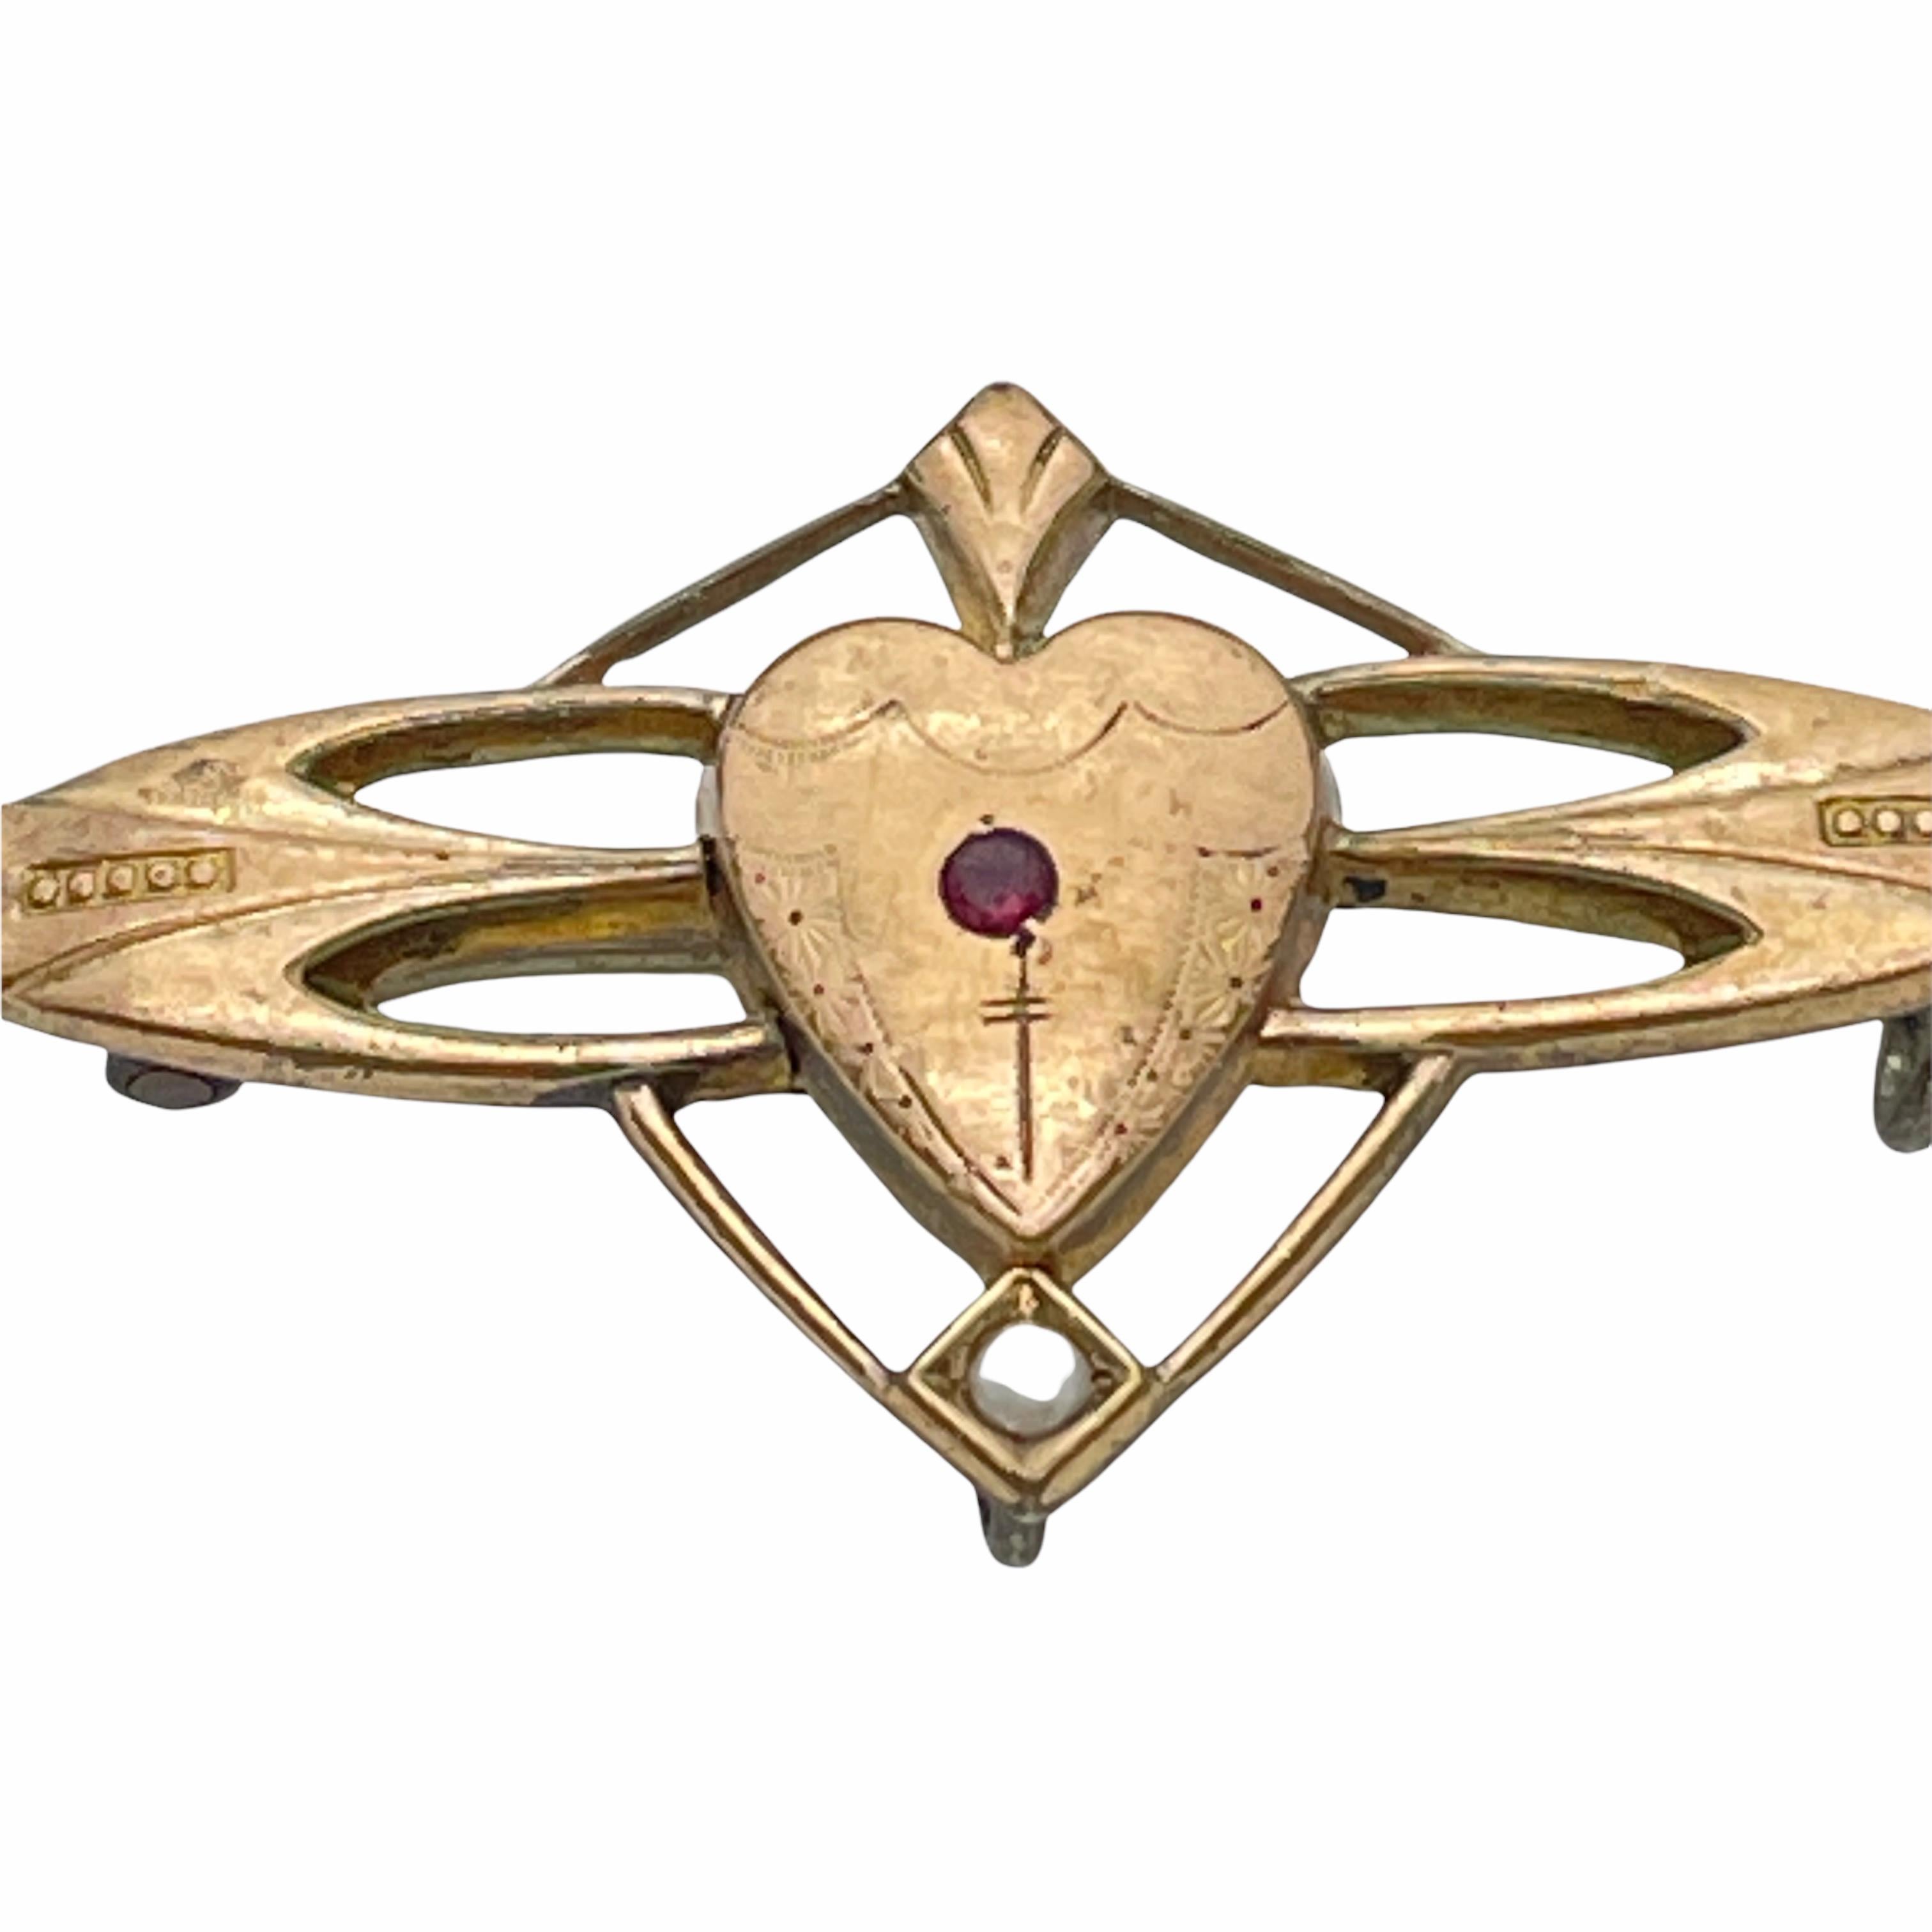 Antique German Art Nouveau Jewelry Heart Pin Brooch Ormolu with Stone, 1900s In Good Condition For Sale In Nuernberg, DE